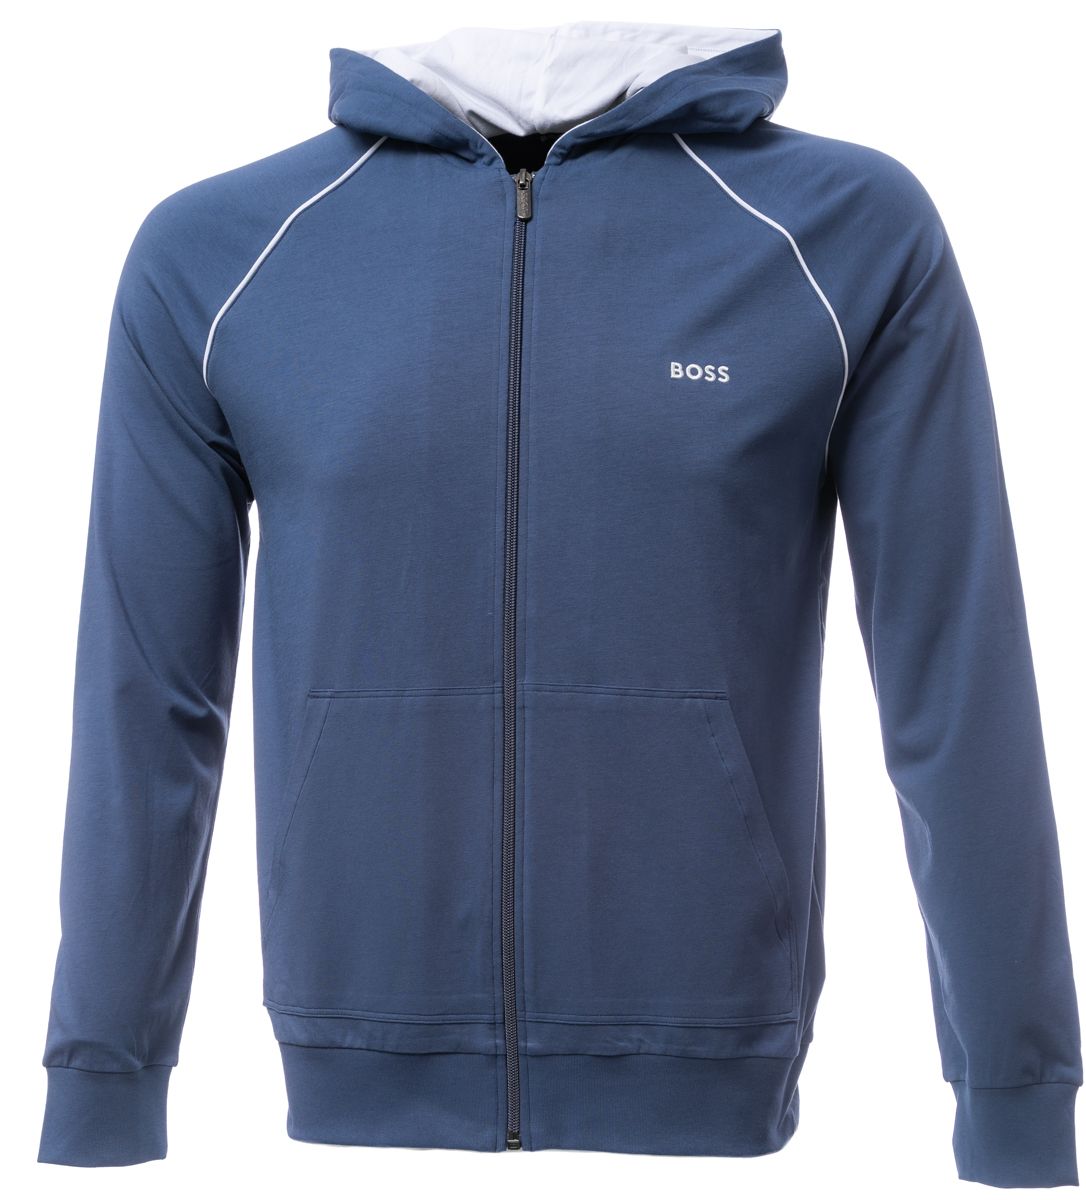 BOSS Mix & Match Hooded Jacket Sweat Top in Navy